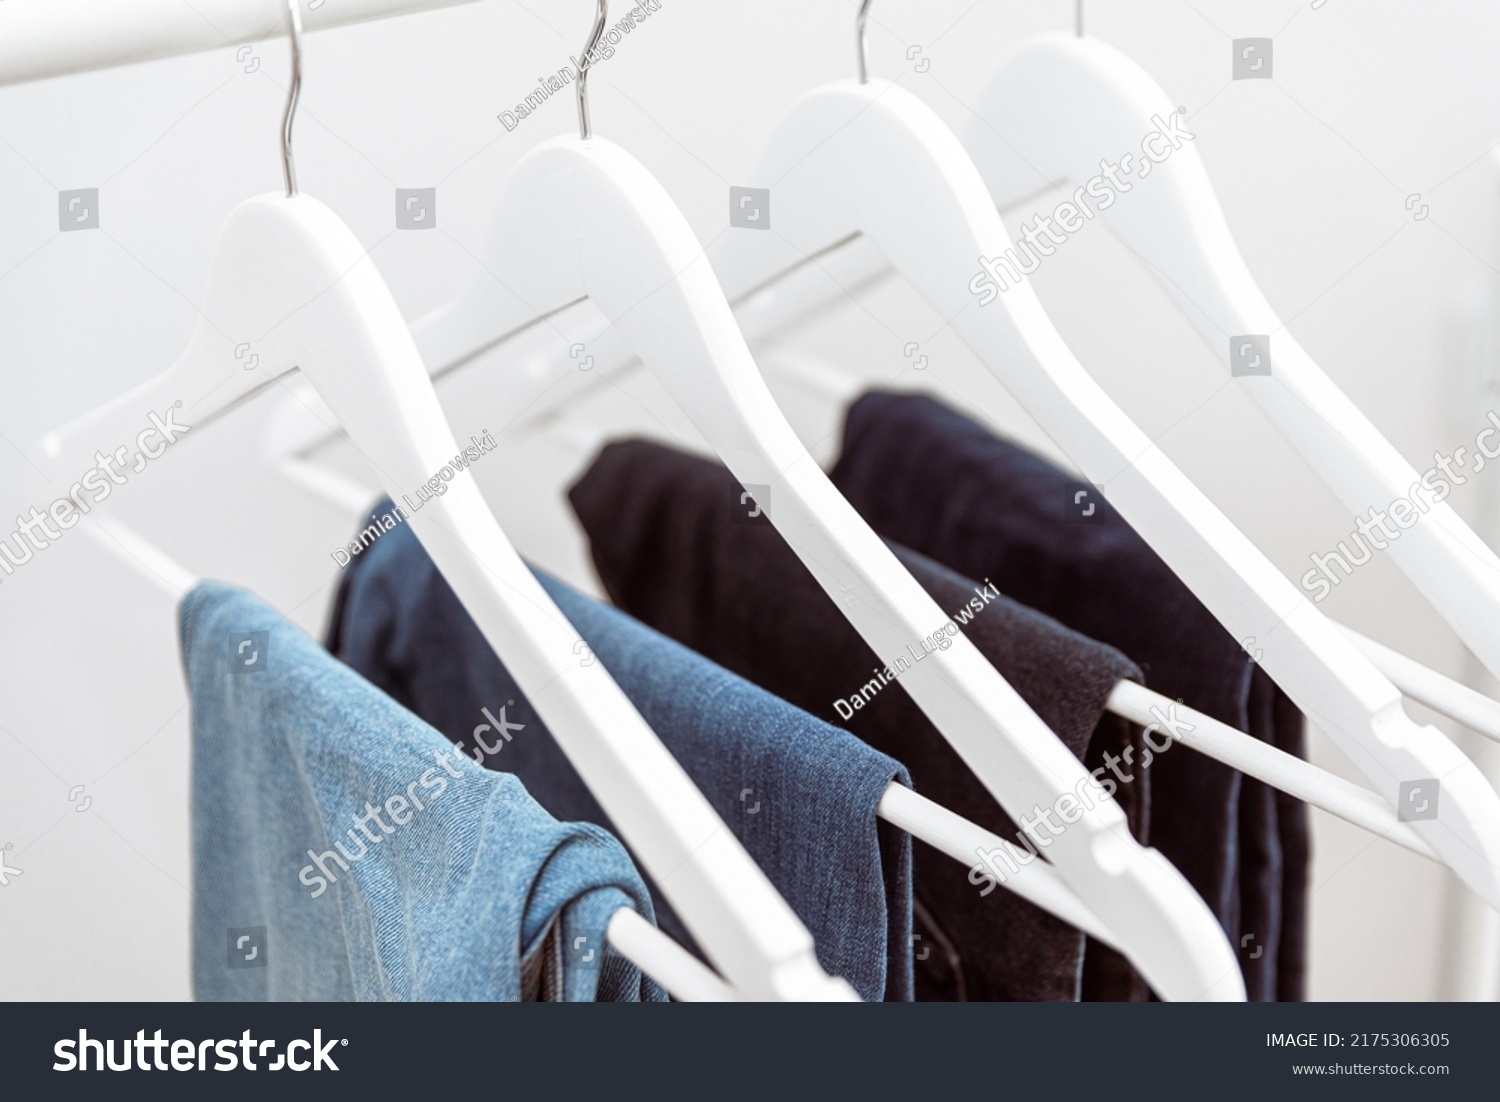 Many blue denim jeans hanging on white clothes hangers on clothing rack. Close up of folded casual denim jeans in wardrobe with coat hangers #2175306305